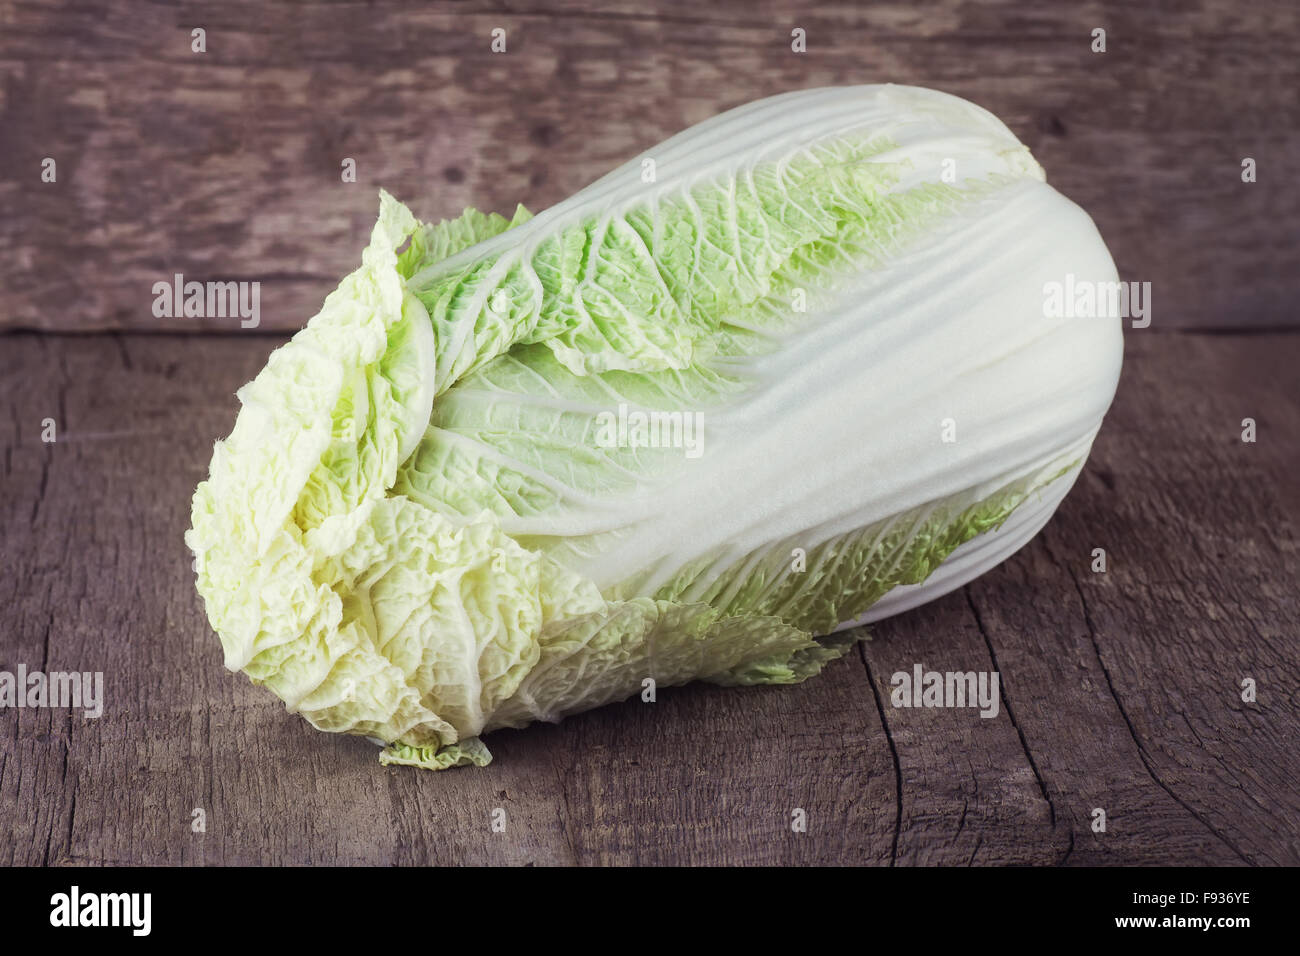 one whole fresh Chinese cabbage on old table Stock Photo